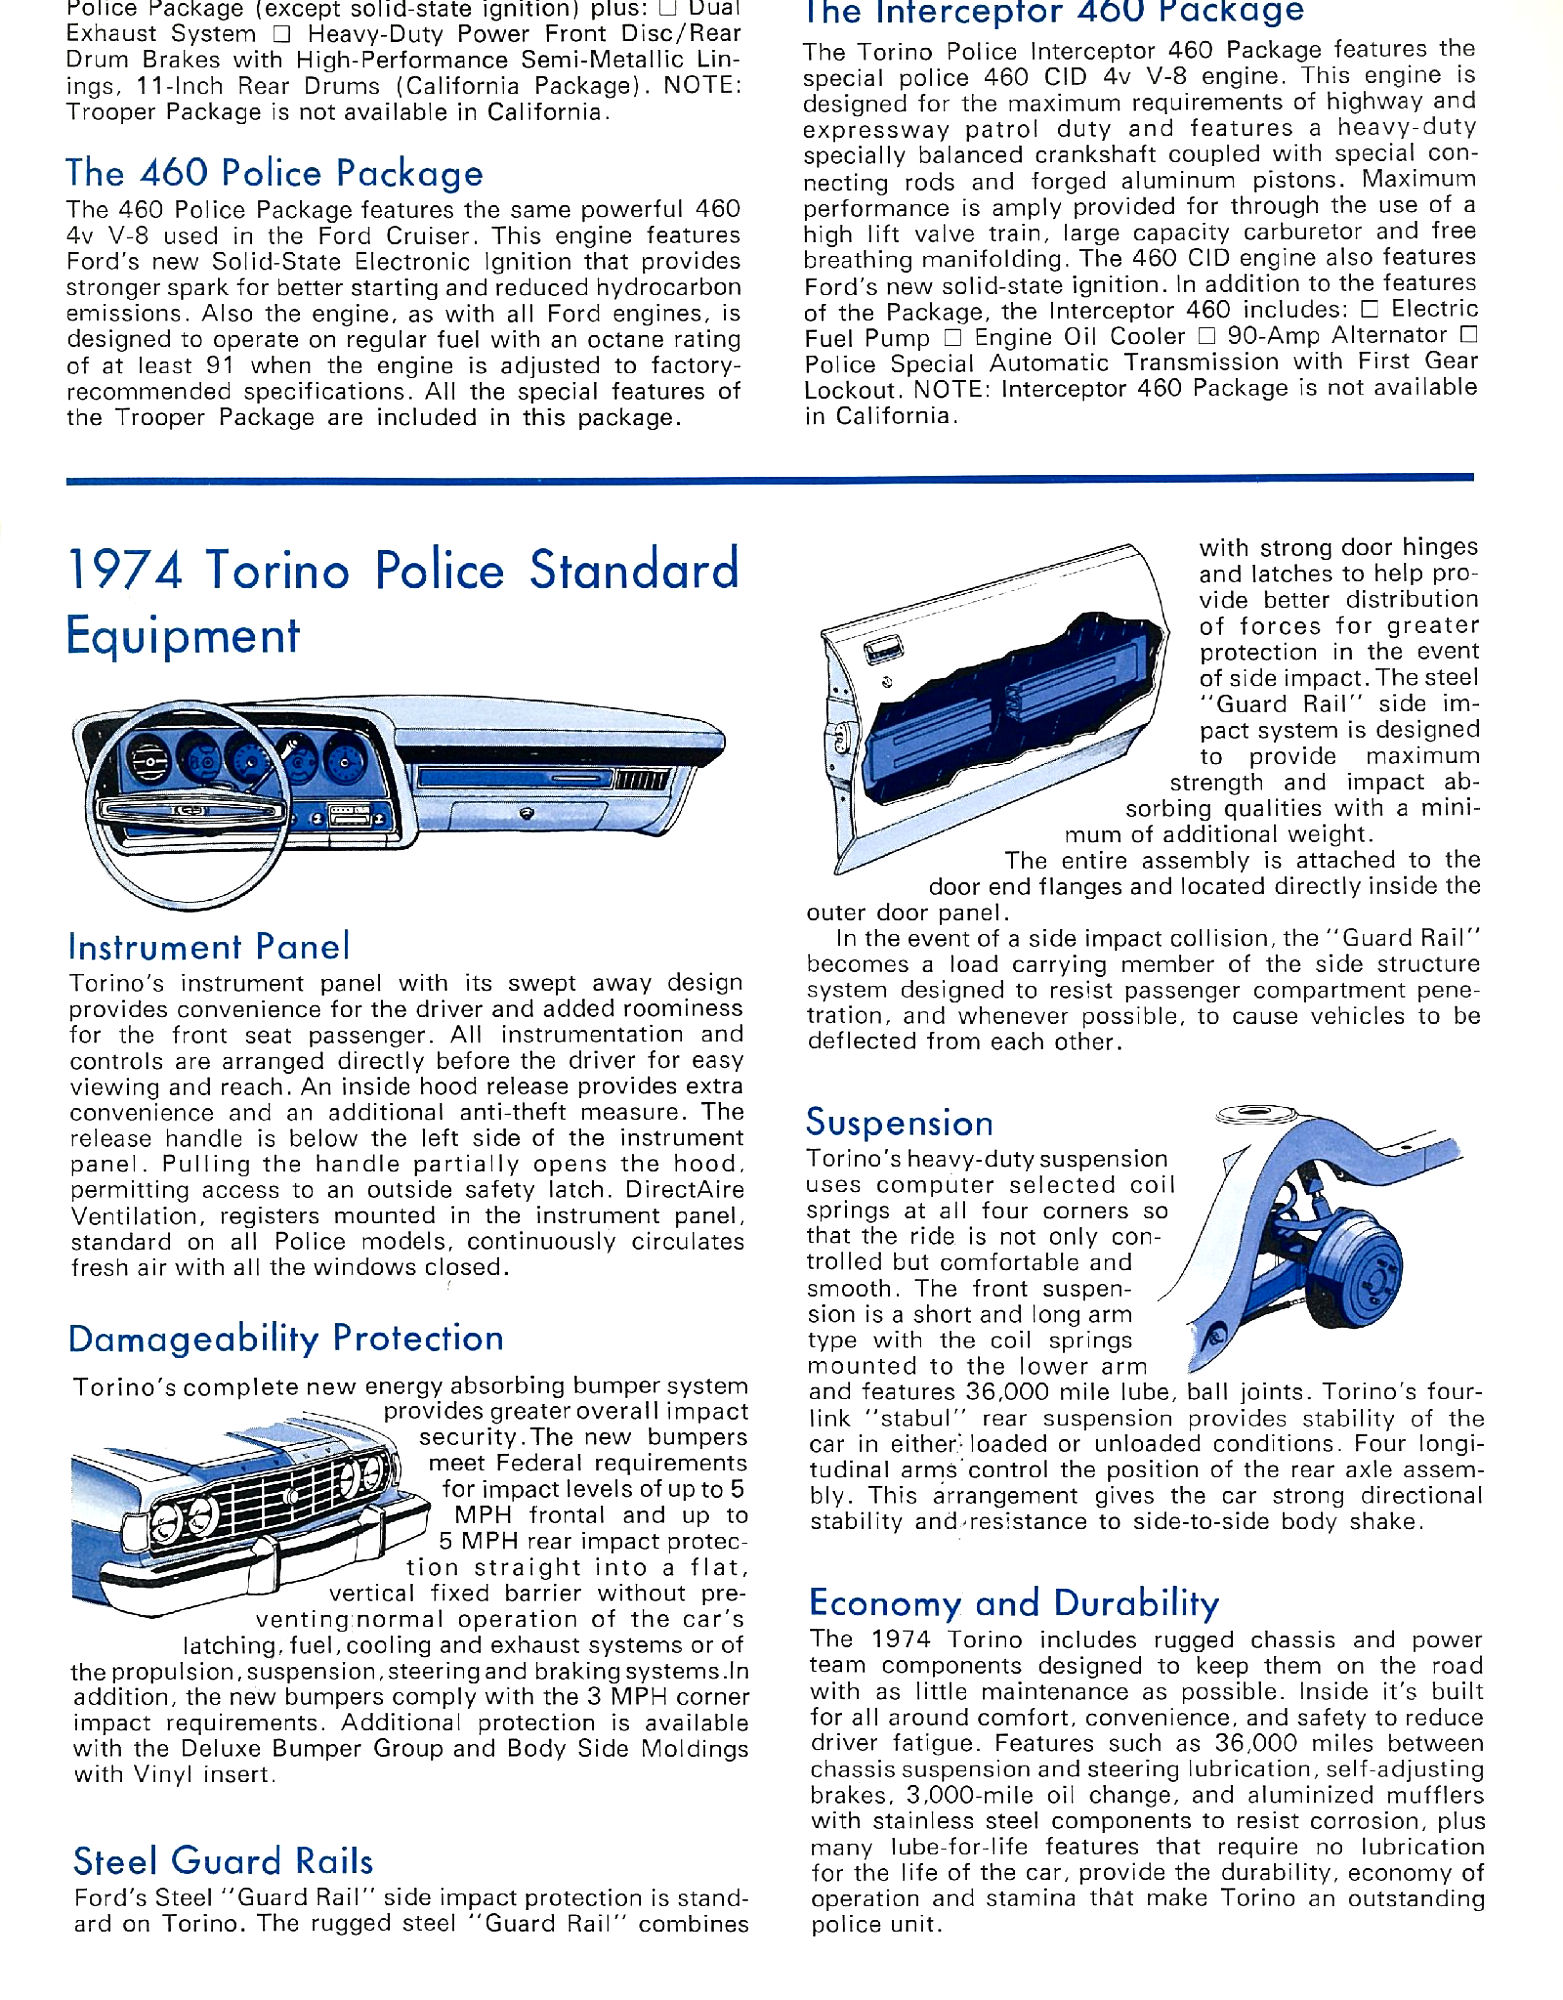 1974 Ford Police Cars-08